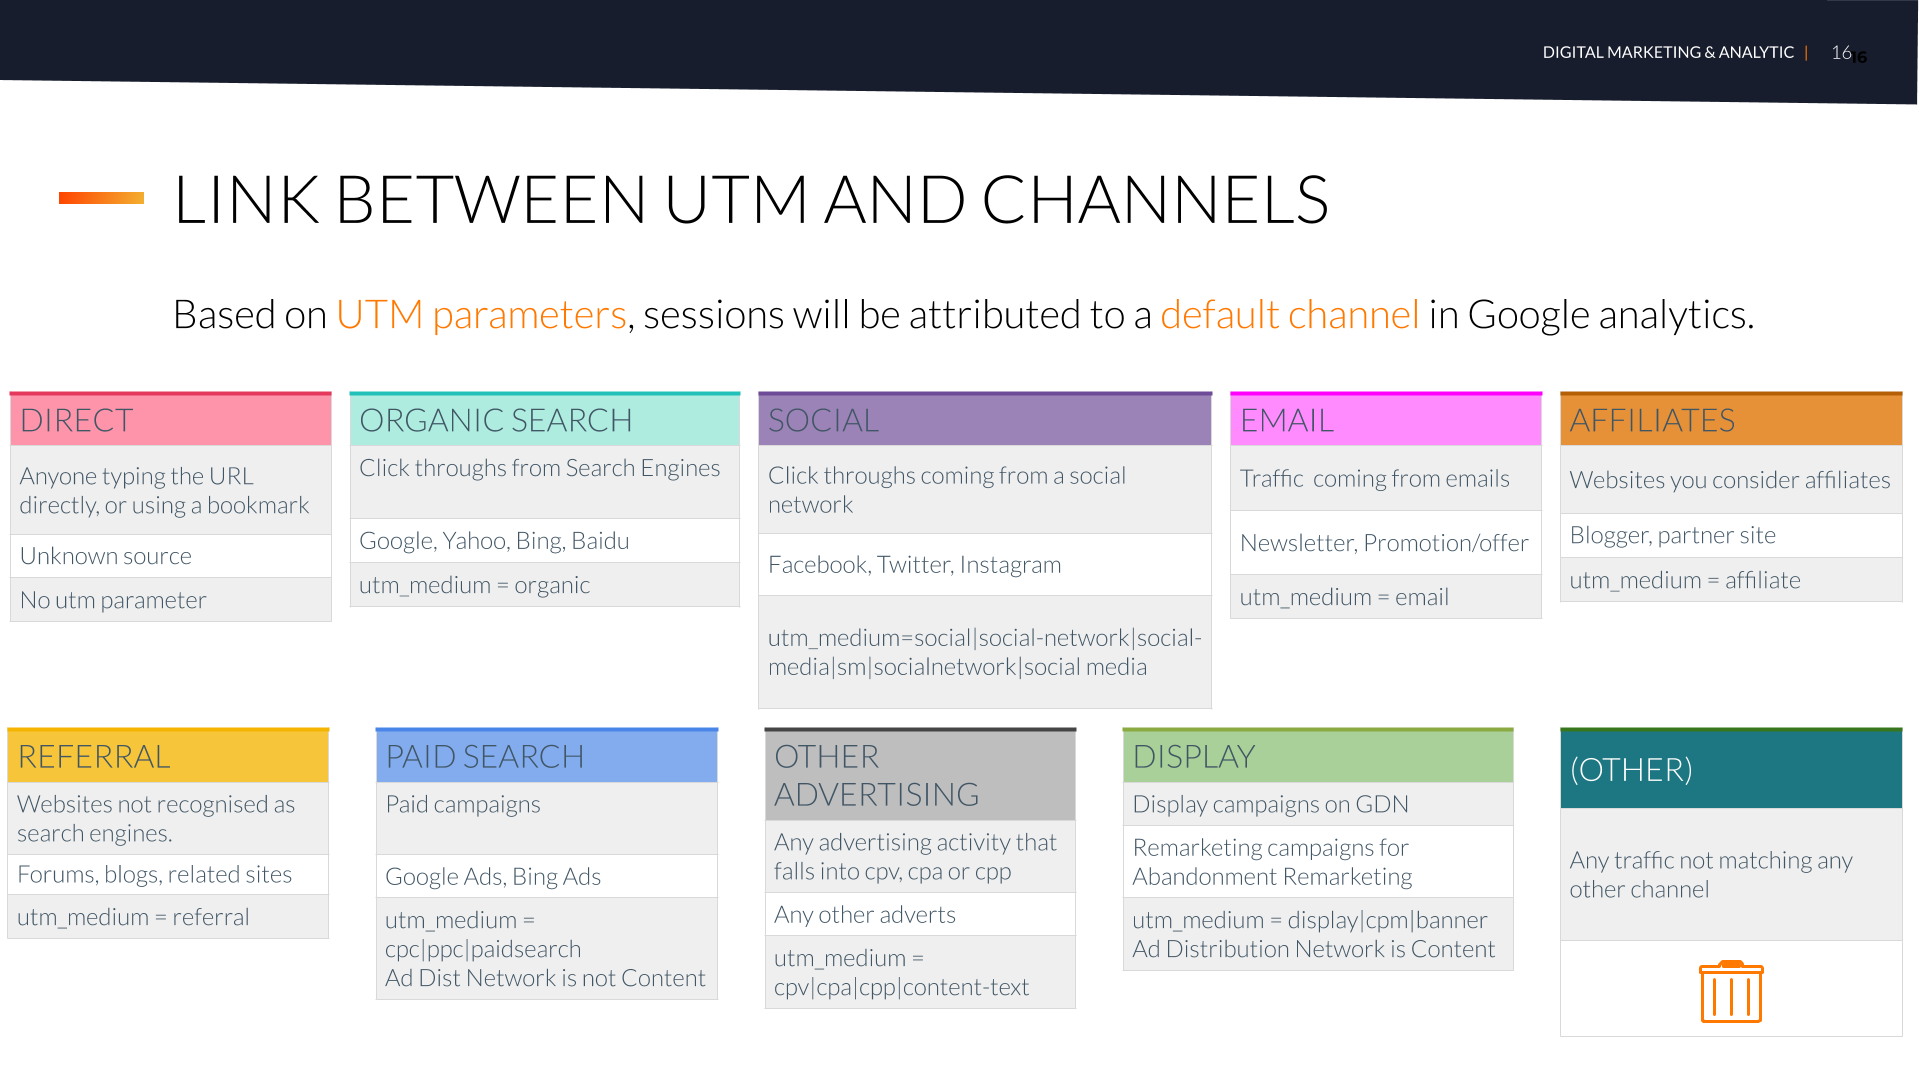 Link between UTM and channels - How to Accurately Track Marketing Campaigns in Google Analytics